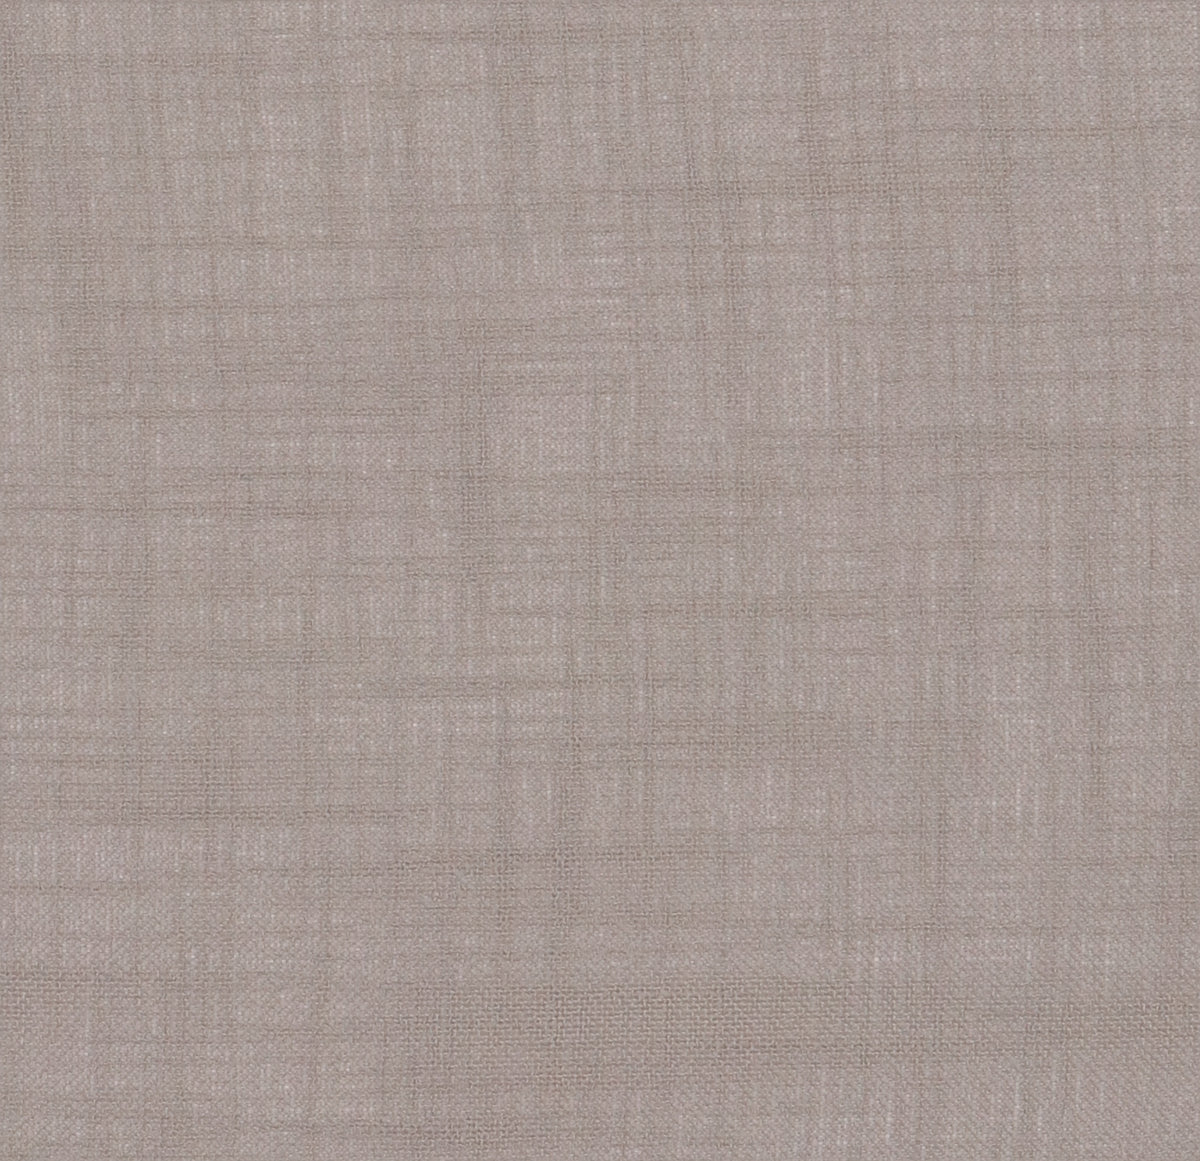 Day curtain taupe Padma